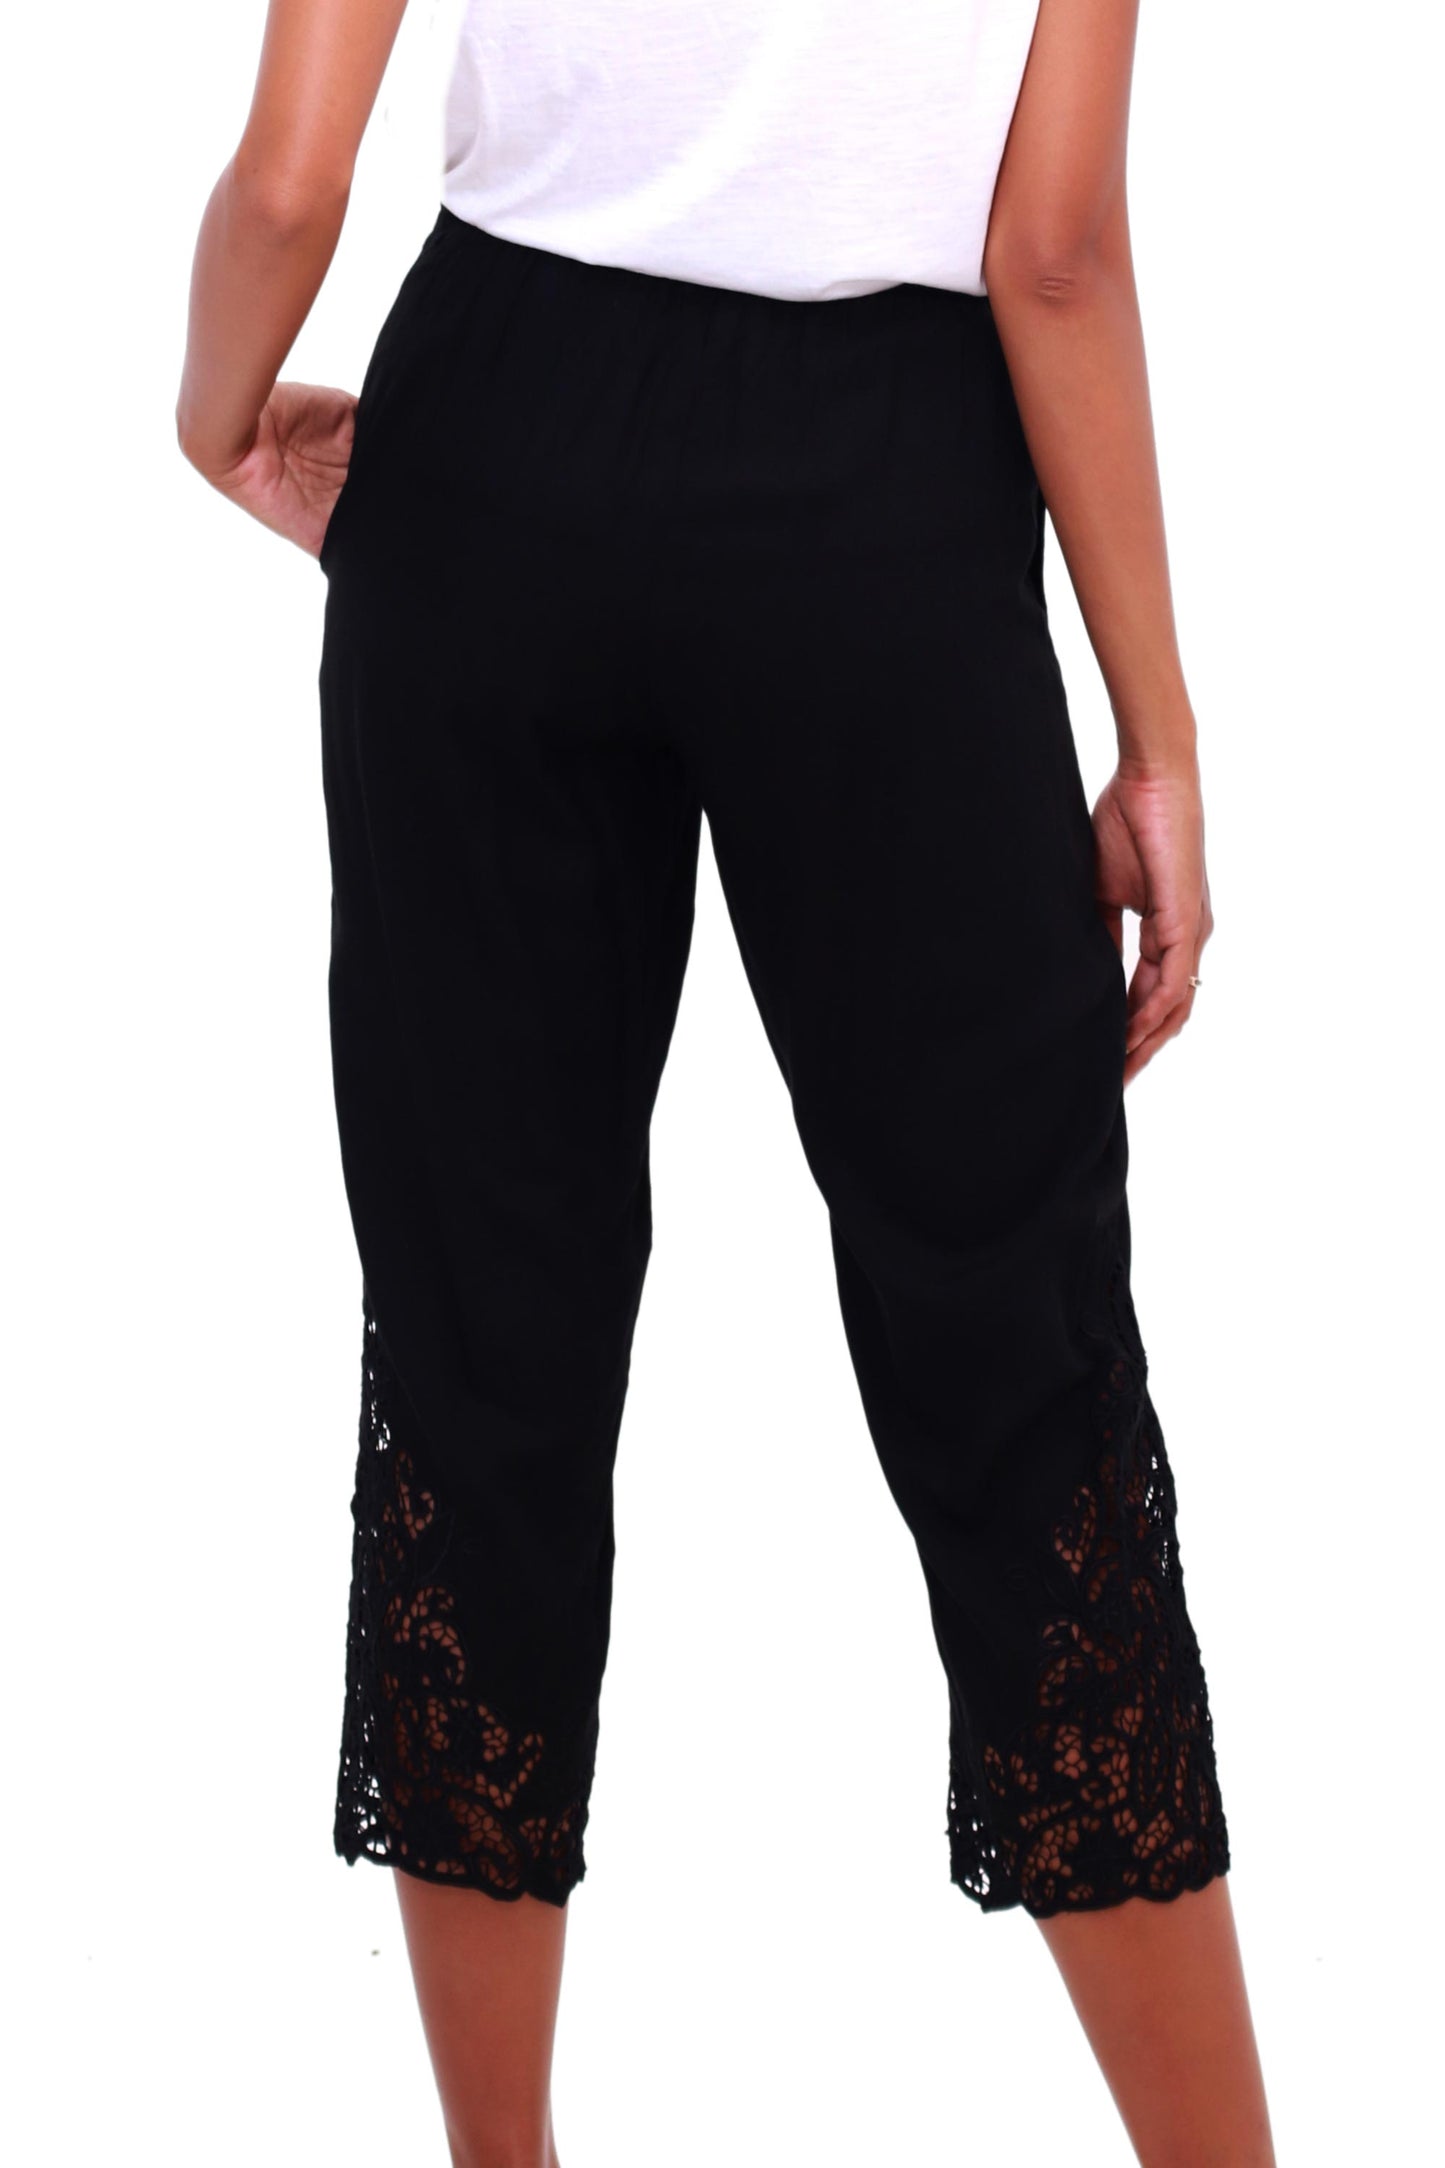 Onyx Padma Flower Floral Embroidered Rayon Pants in Onyx from Bali